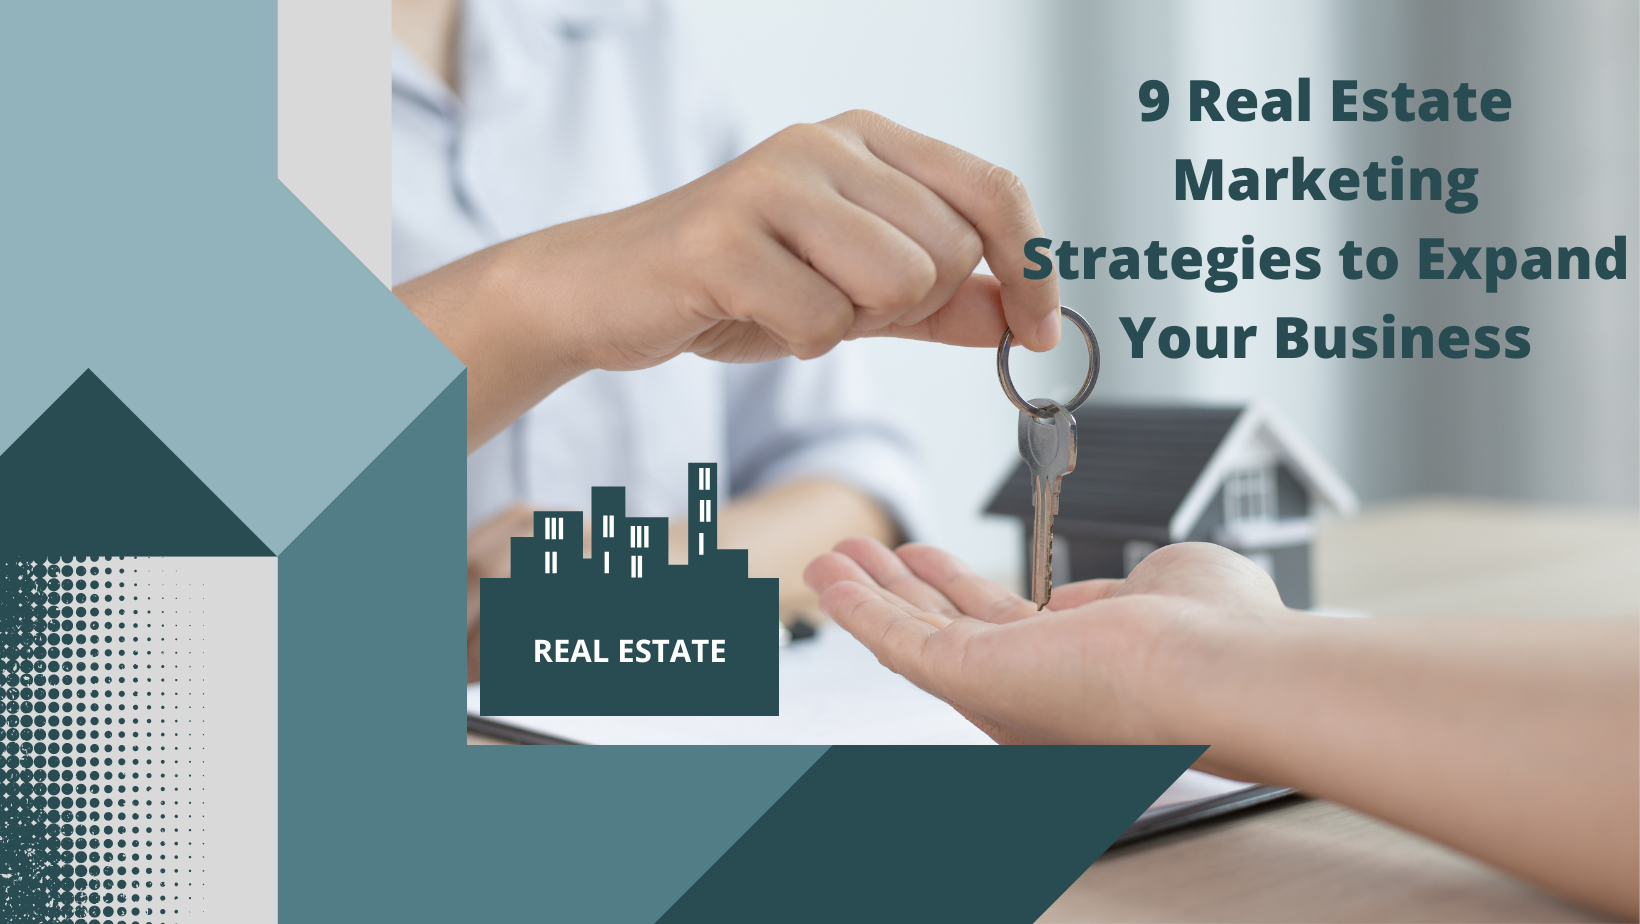 9 Real Estate Marketing Strategies to Expand Your Business